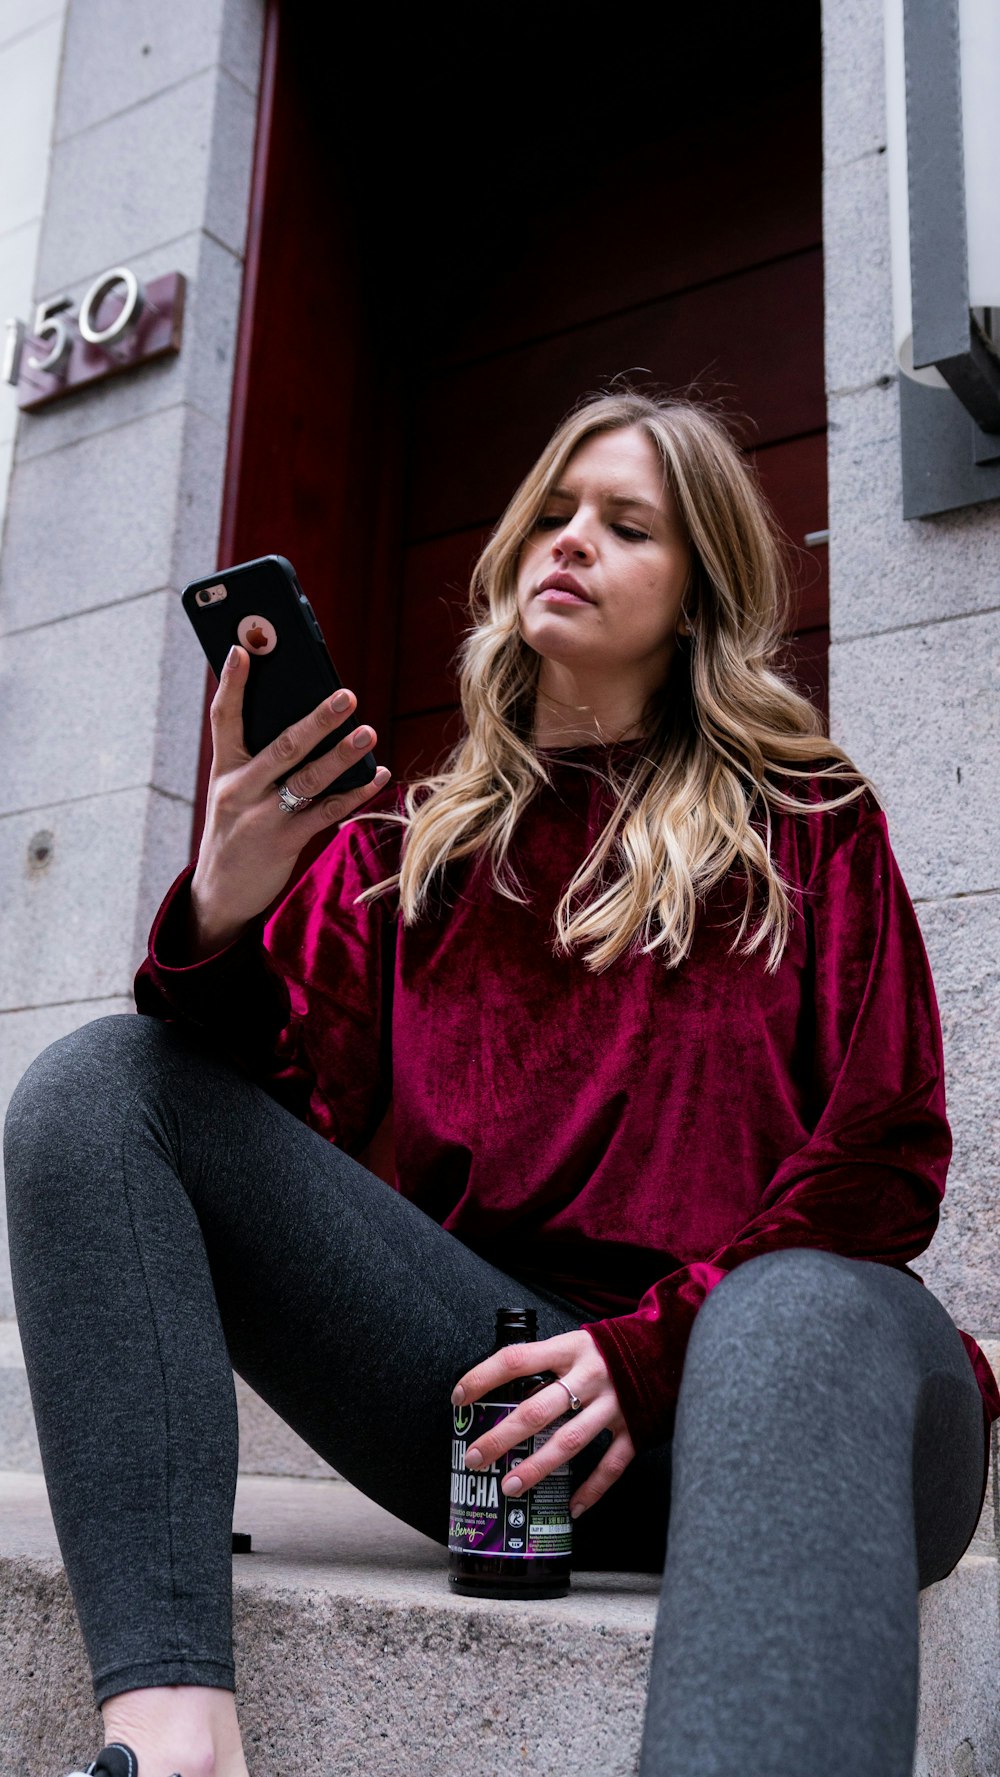 woman in red sweater and gray pants holding black smartphone